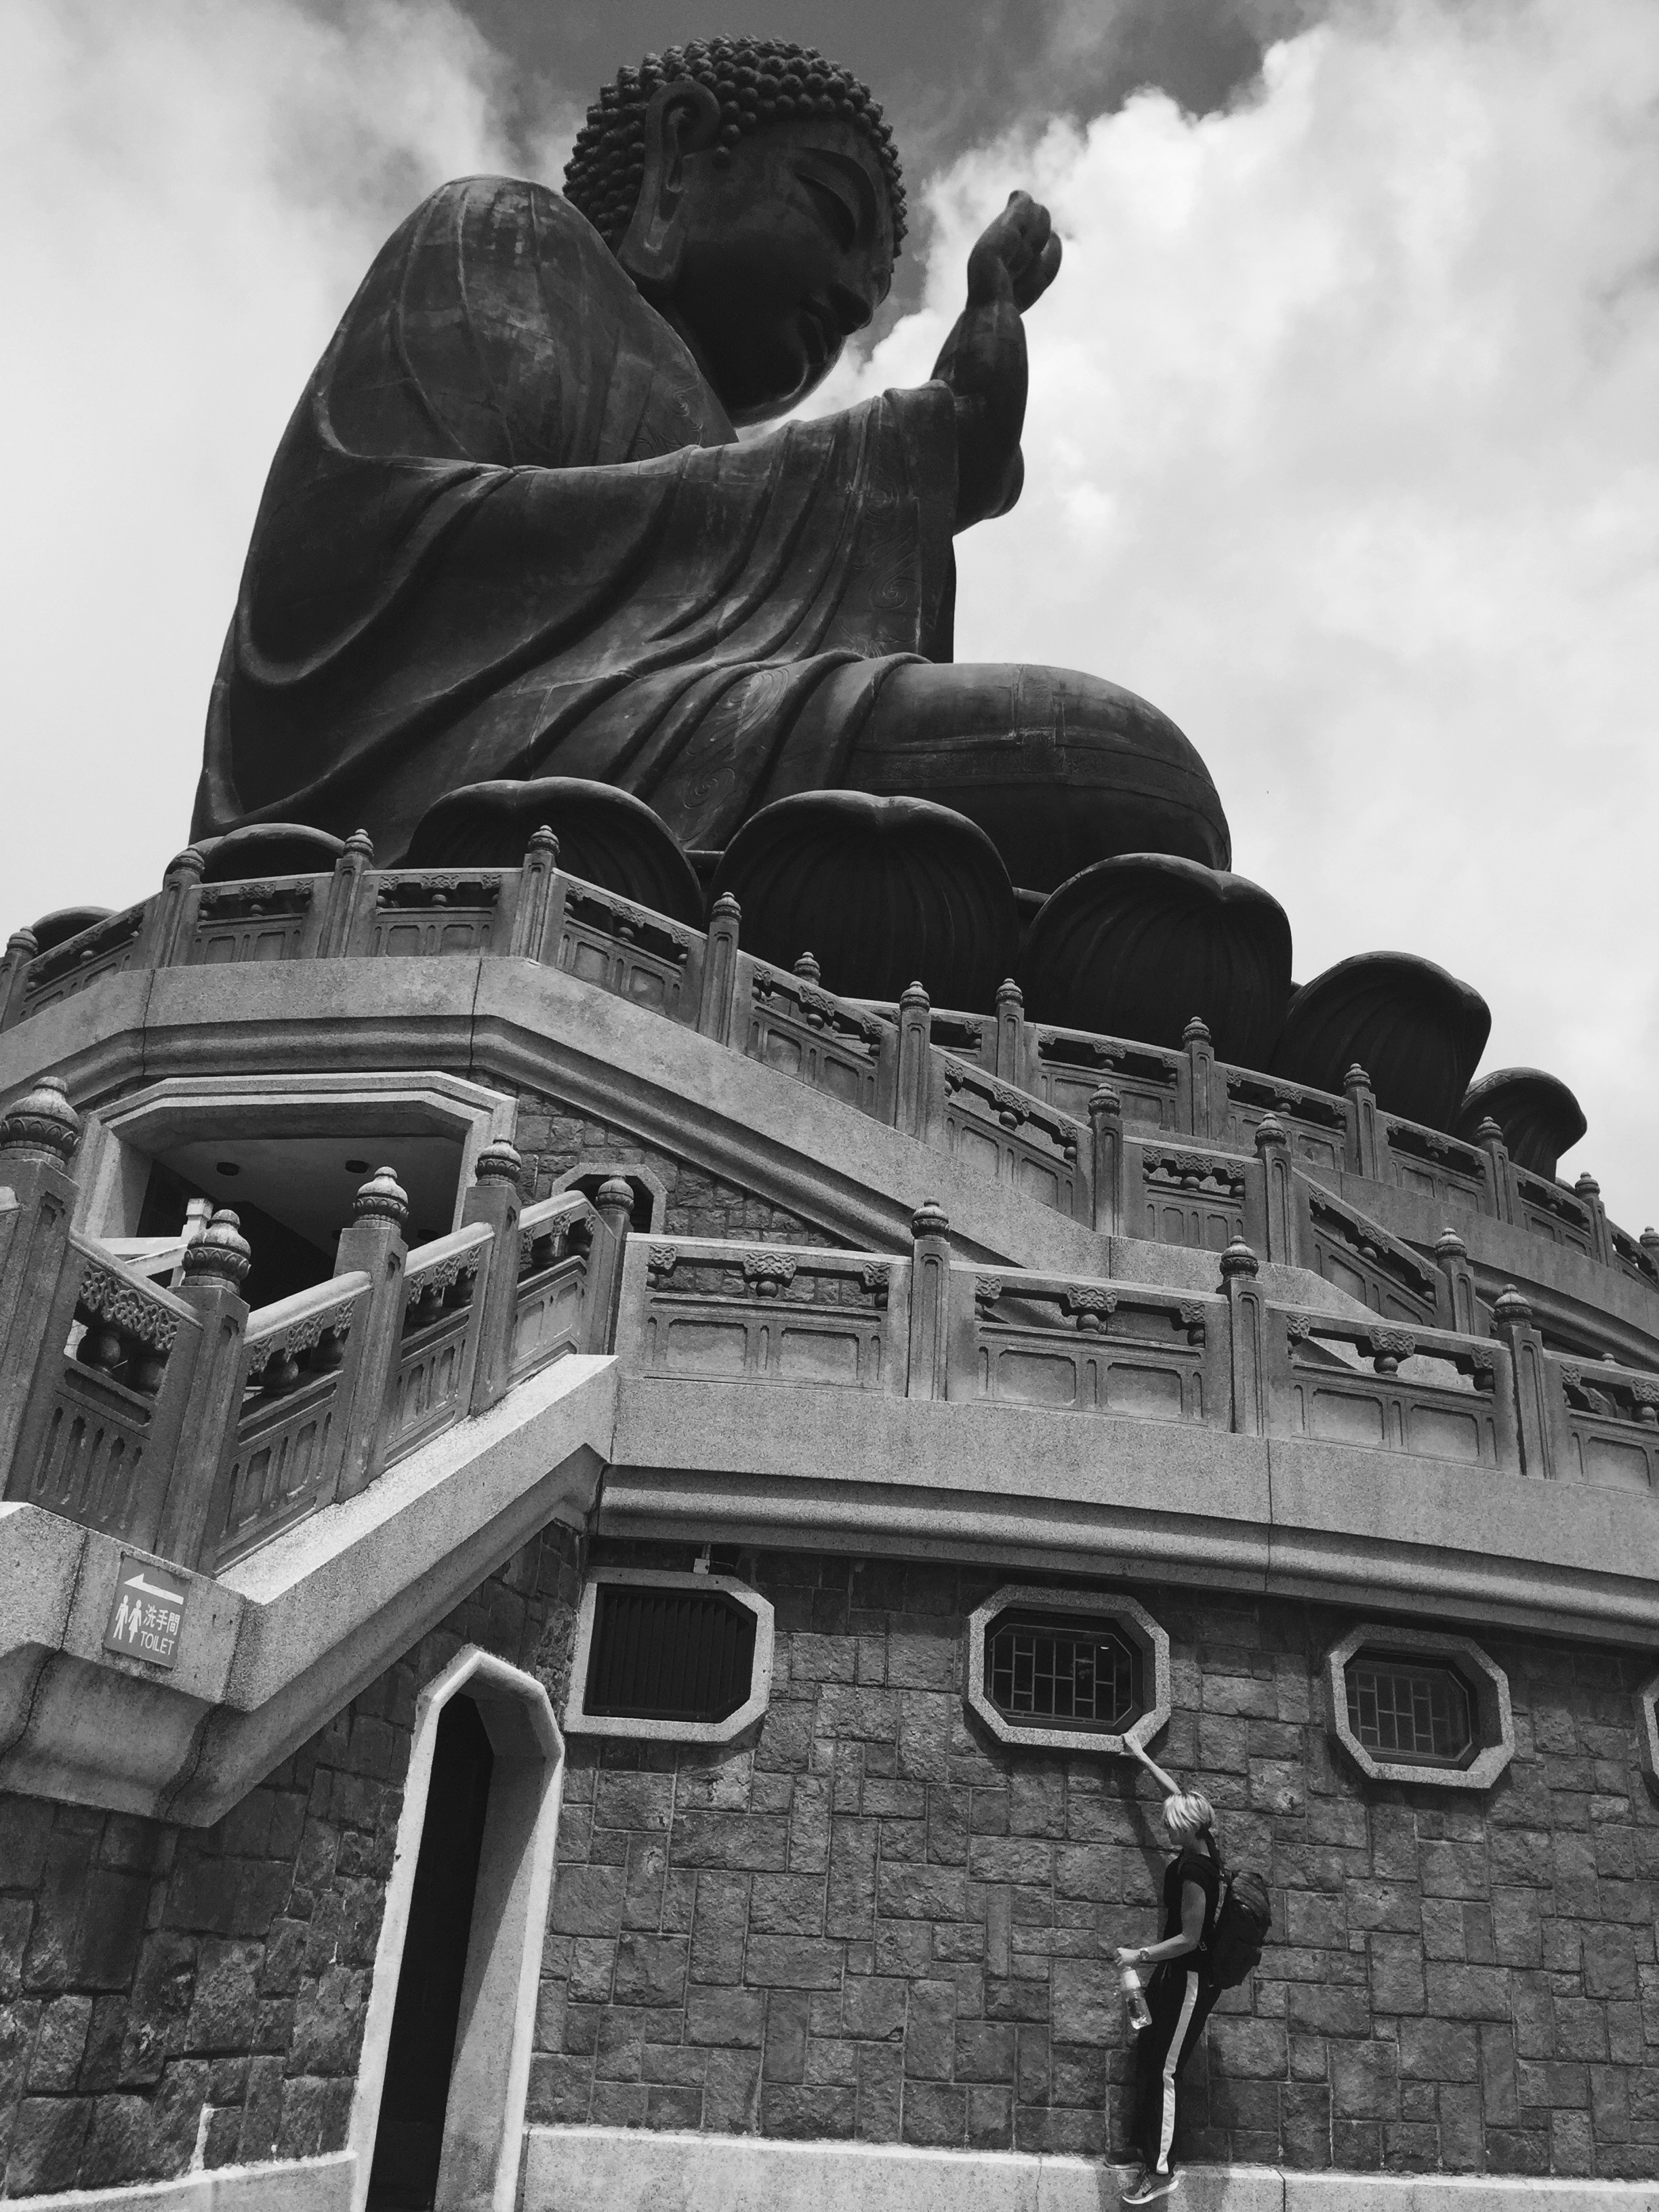 Scroll down and read about turning your 6-12 hour Hong Kong Layover into an adventure with the Tian Tan Buddha